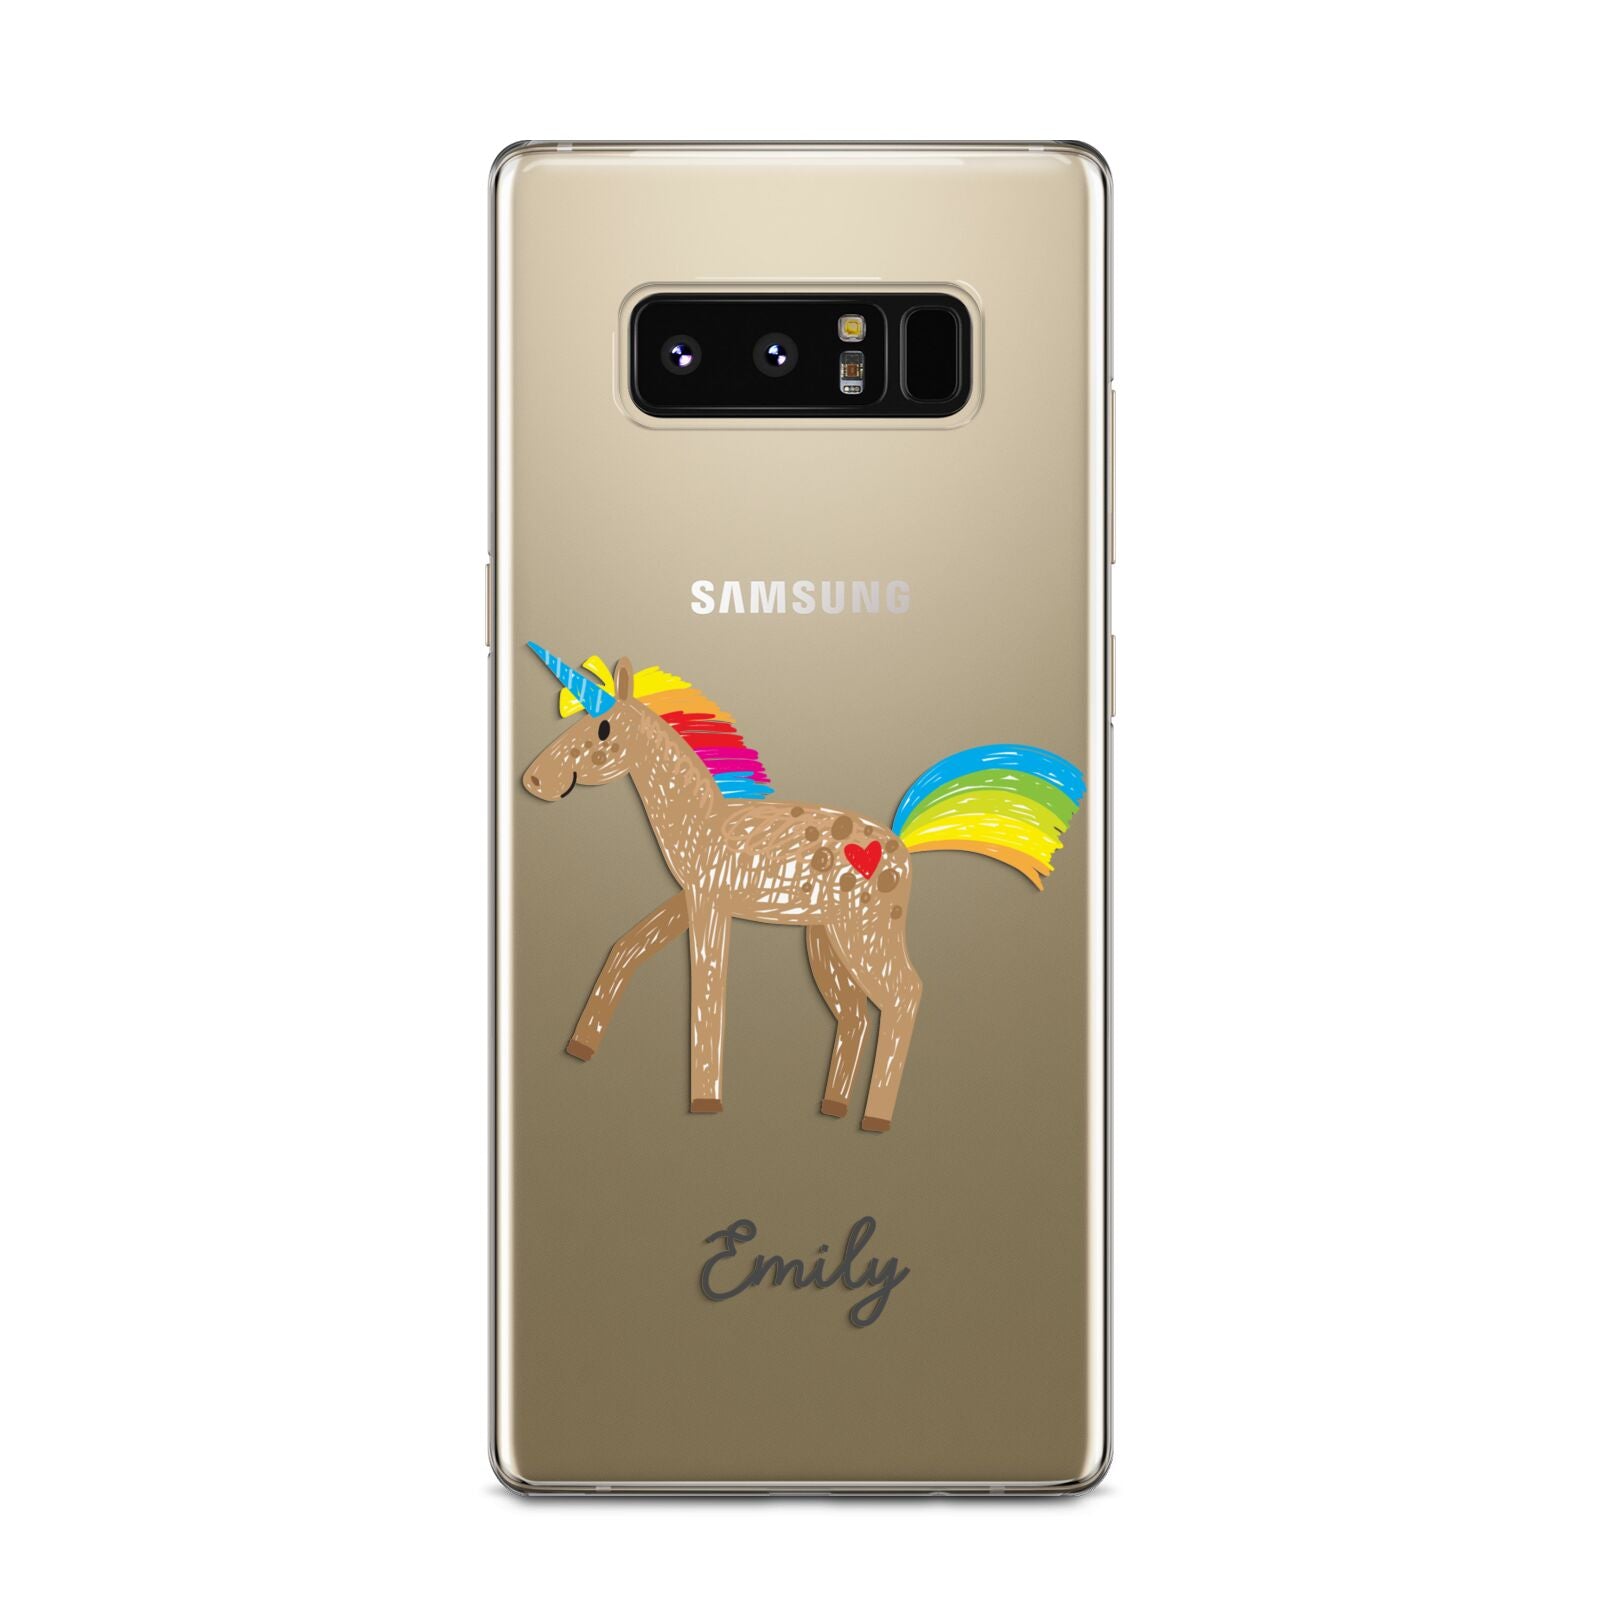 Personalised Unicorn with Name Samsung Galaxy Note 8 Case